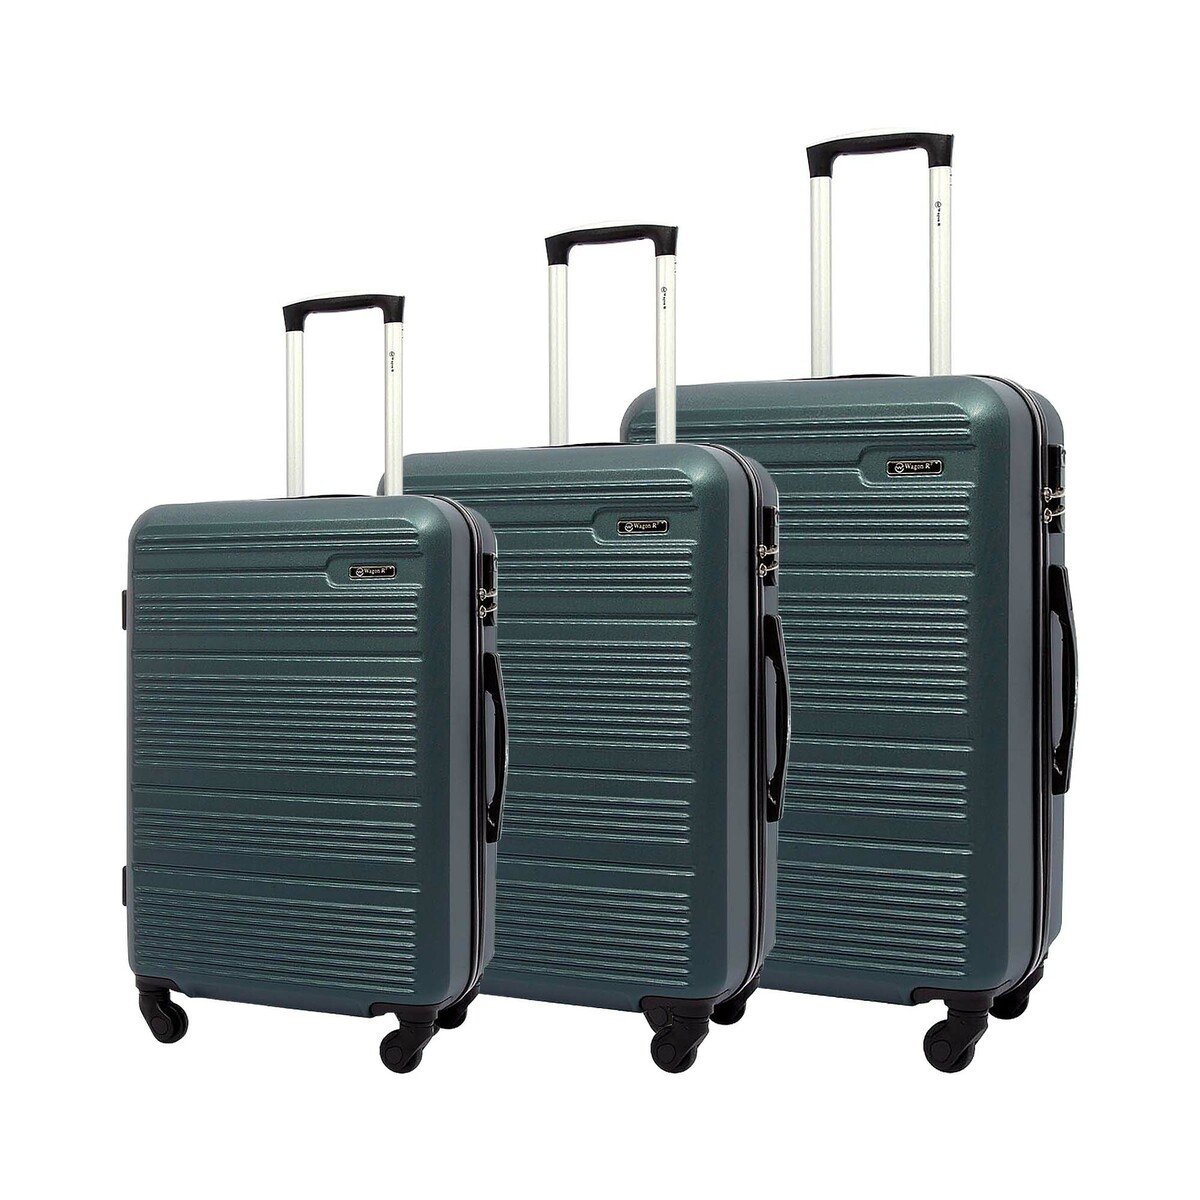 Wagon R ABS 4Wheel Hard Trolley WB621 3Pcs Set (20+24+28 inches) Assorted Color